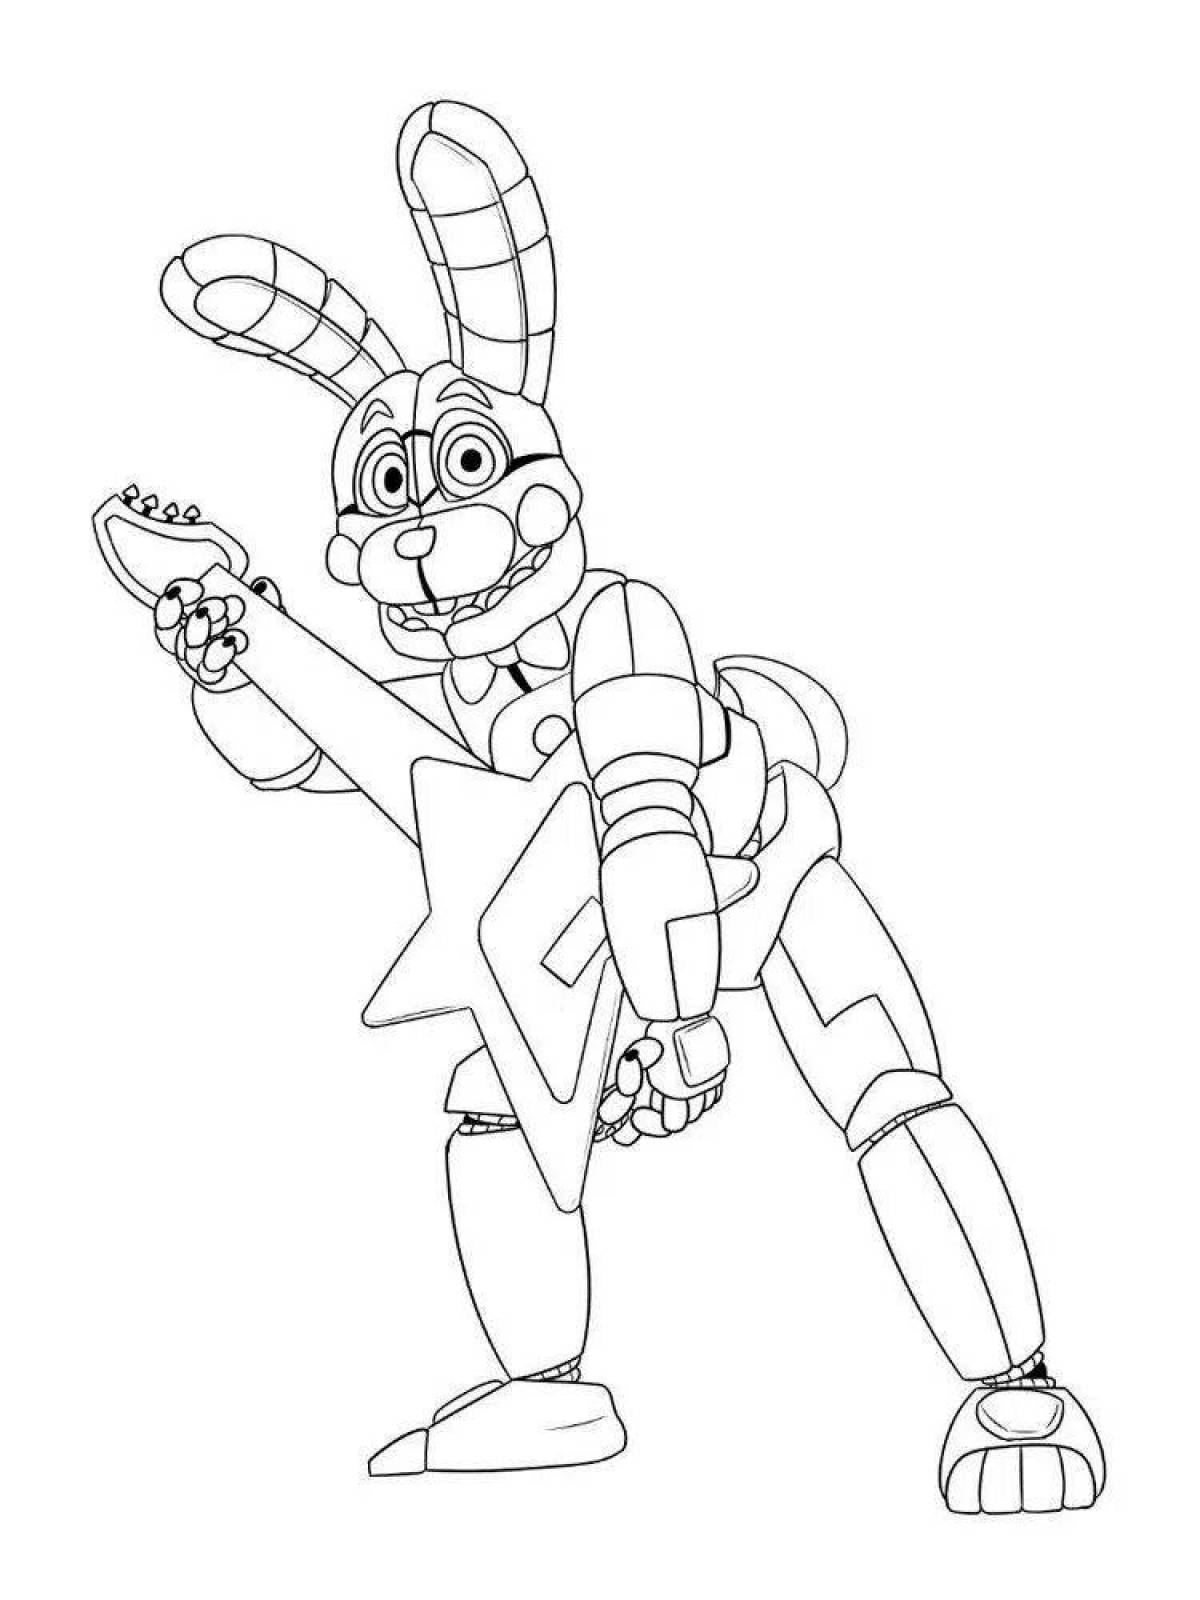 Charming bonnie coloring page